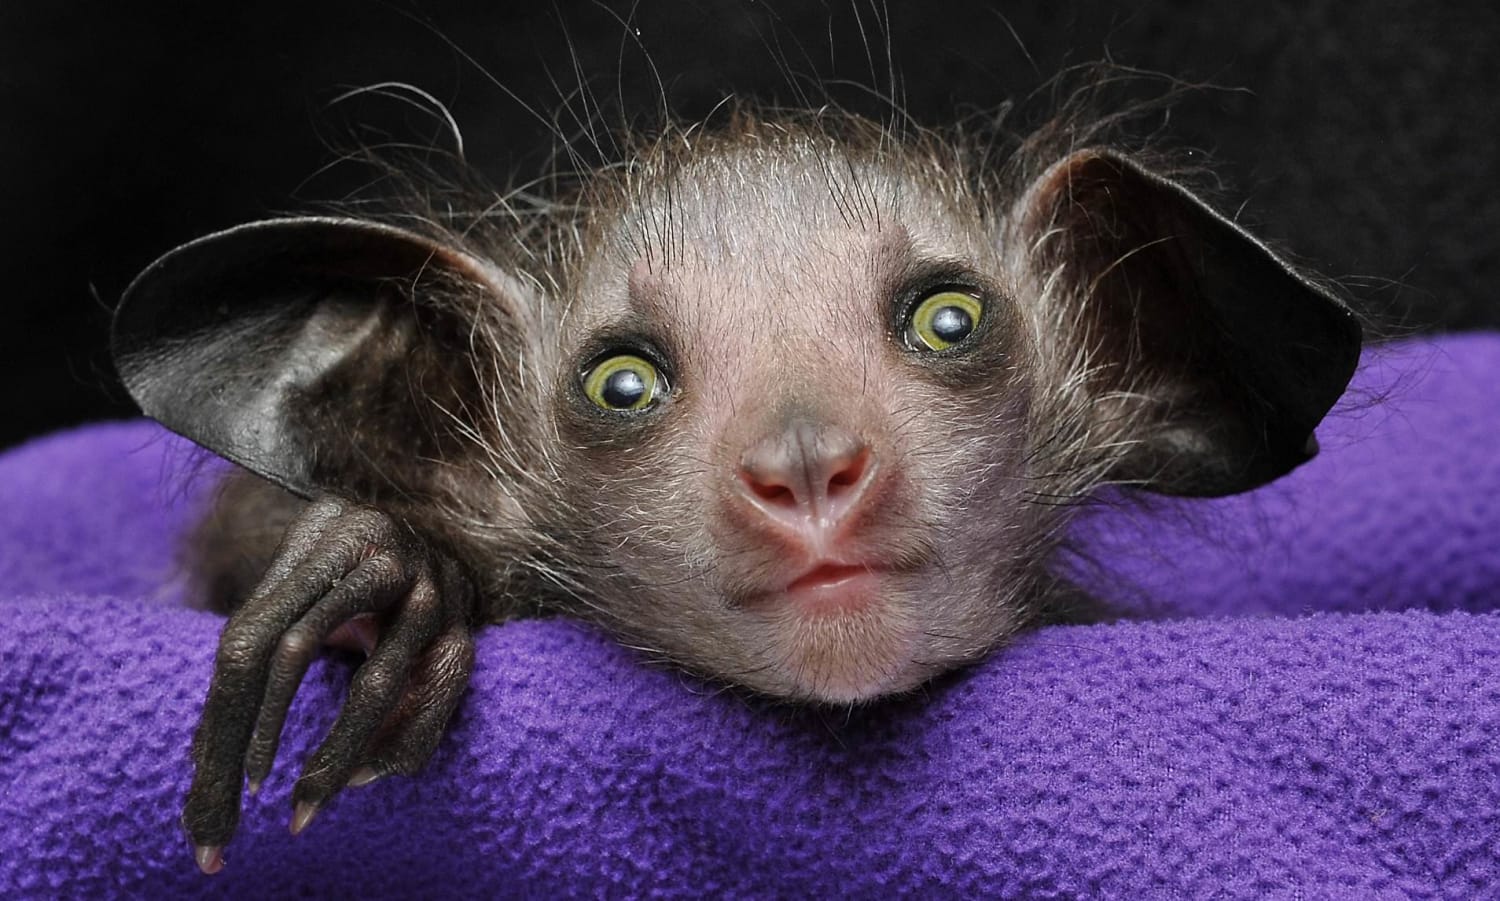 The Aye-Aye is an endangered lemur, being killed on sight due to superstition. The Aye-Aye is the world's largest nocturnal primate. It fills the ecological niche of a woodpecker, using its unique elongated middle finger to tap on trees to detect food within. Their ears allow them to echolocate!